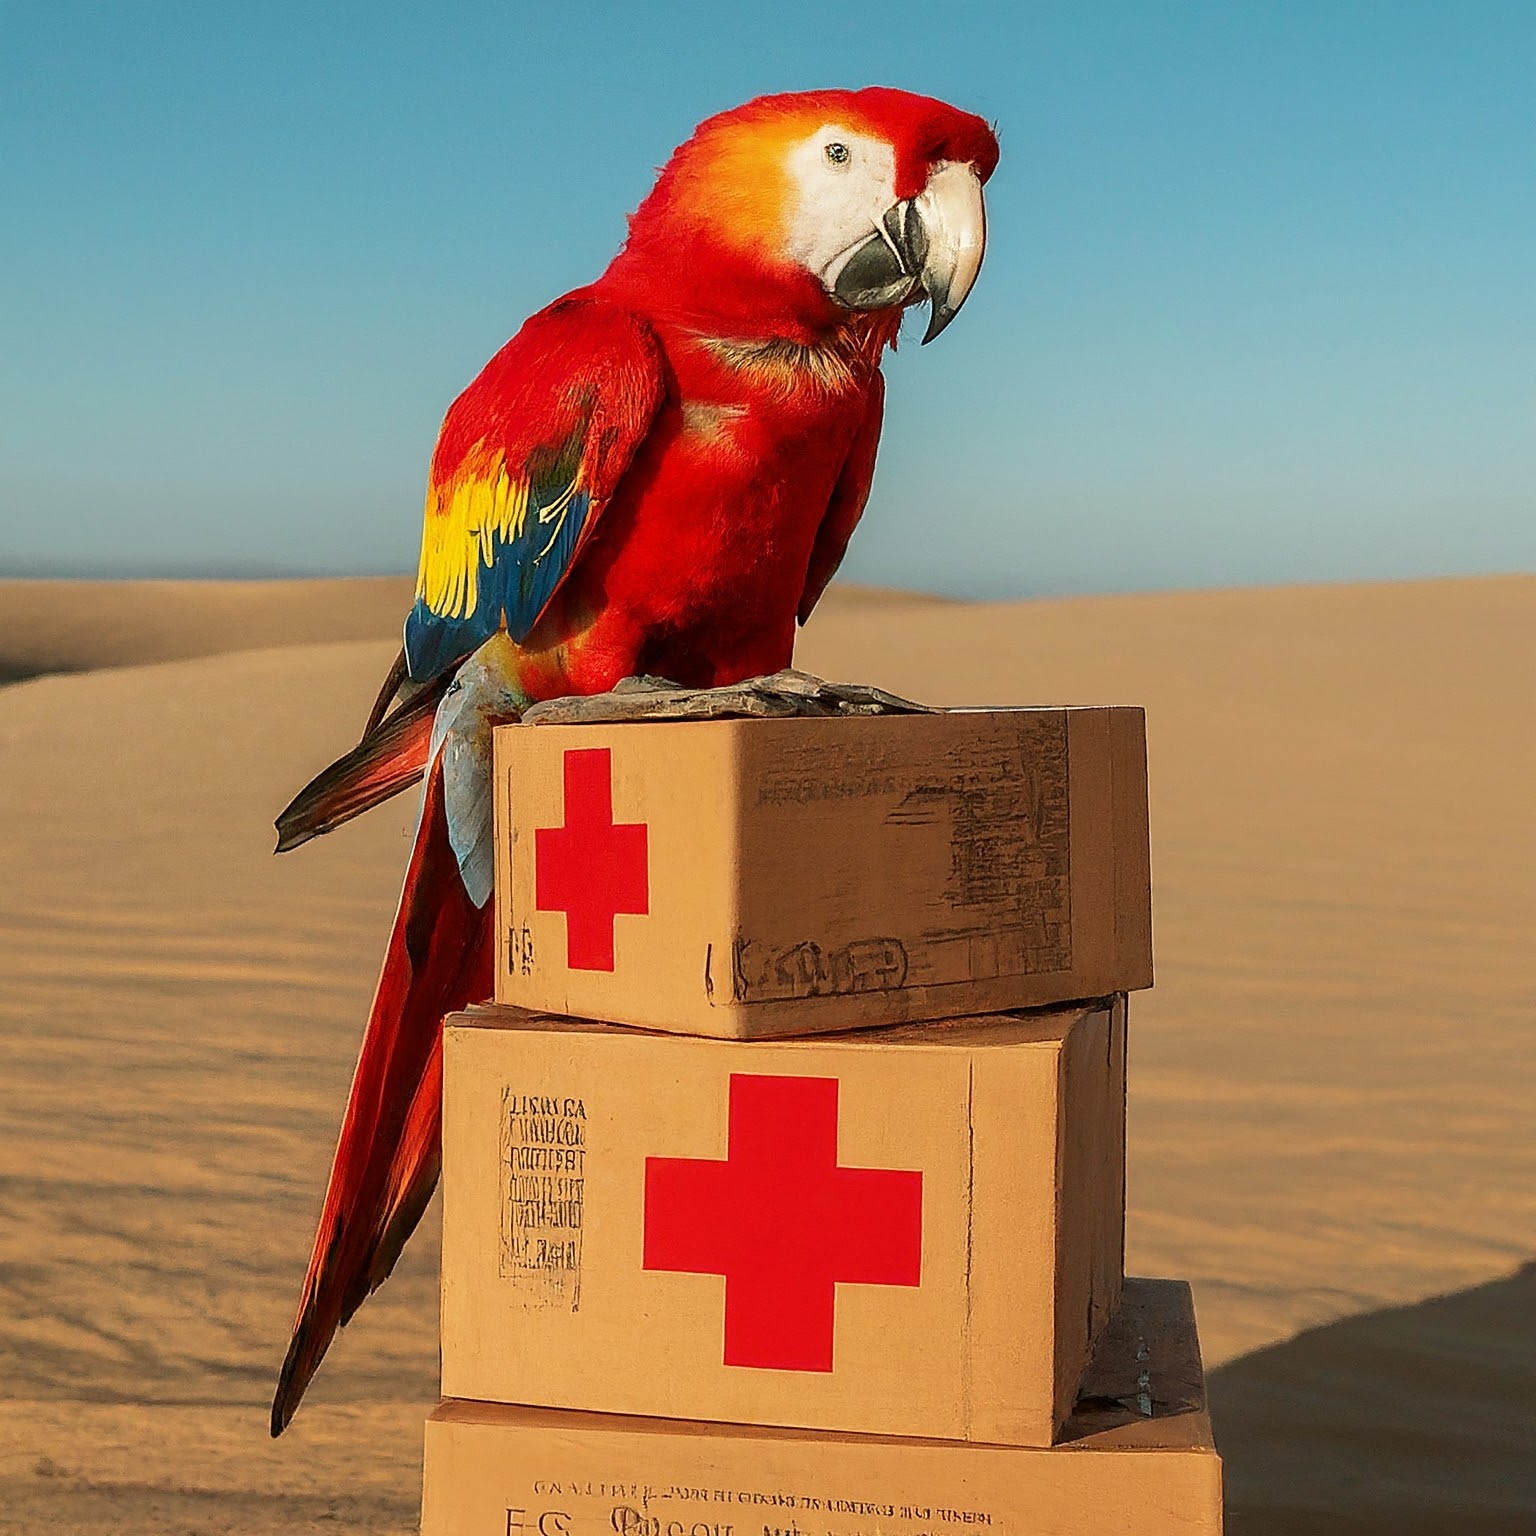 Red Guacamaya on red cross aid boxes